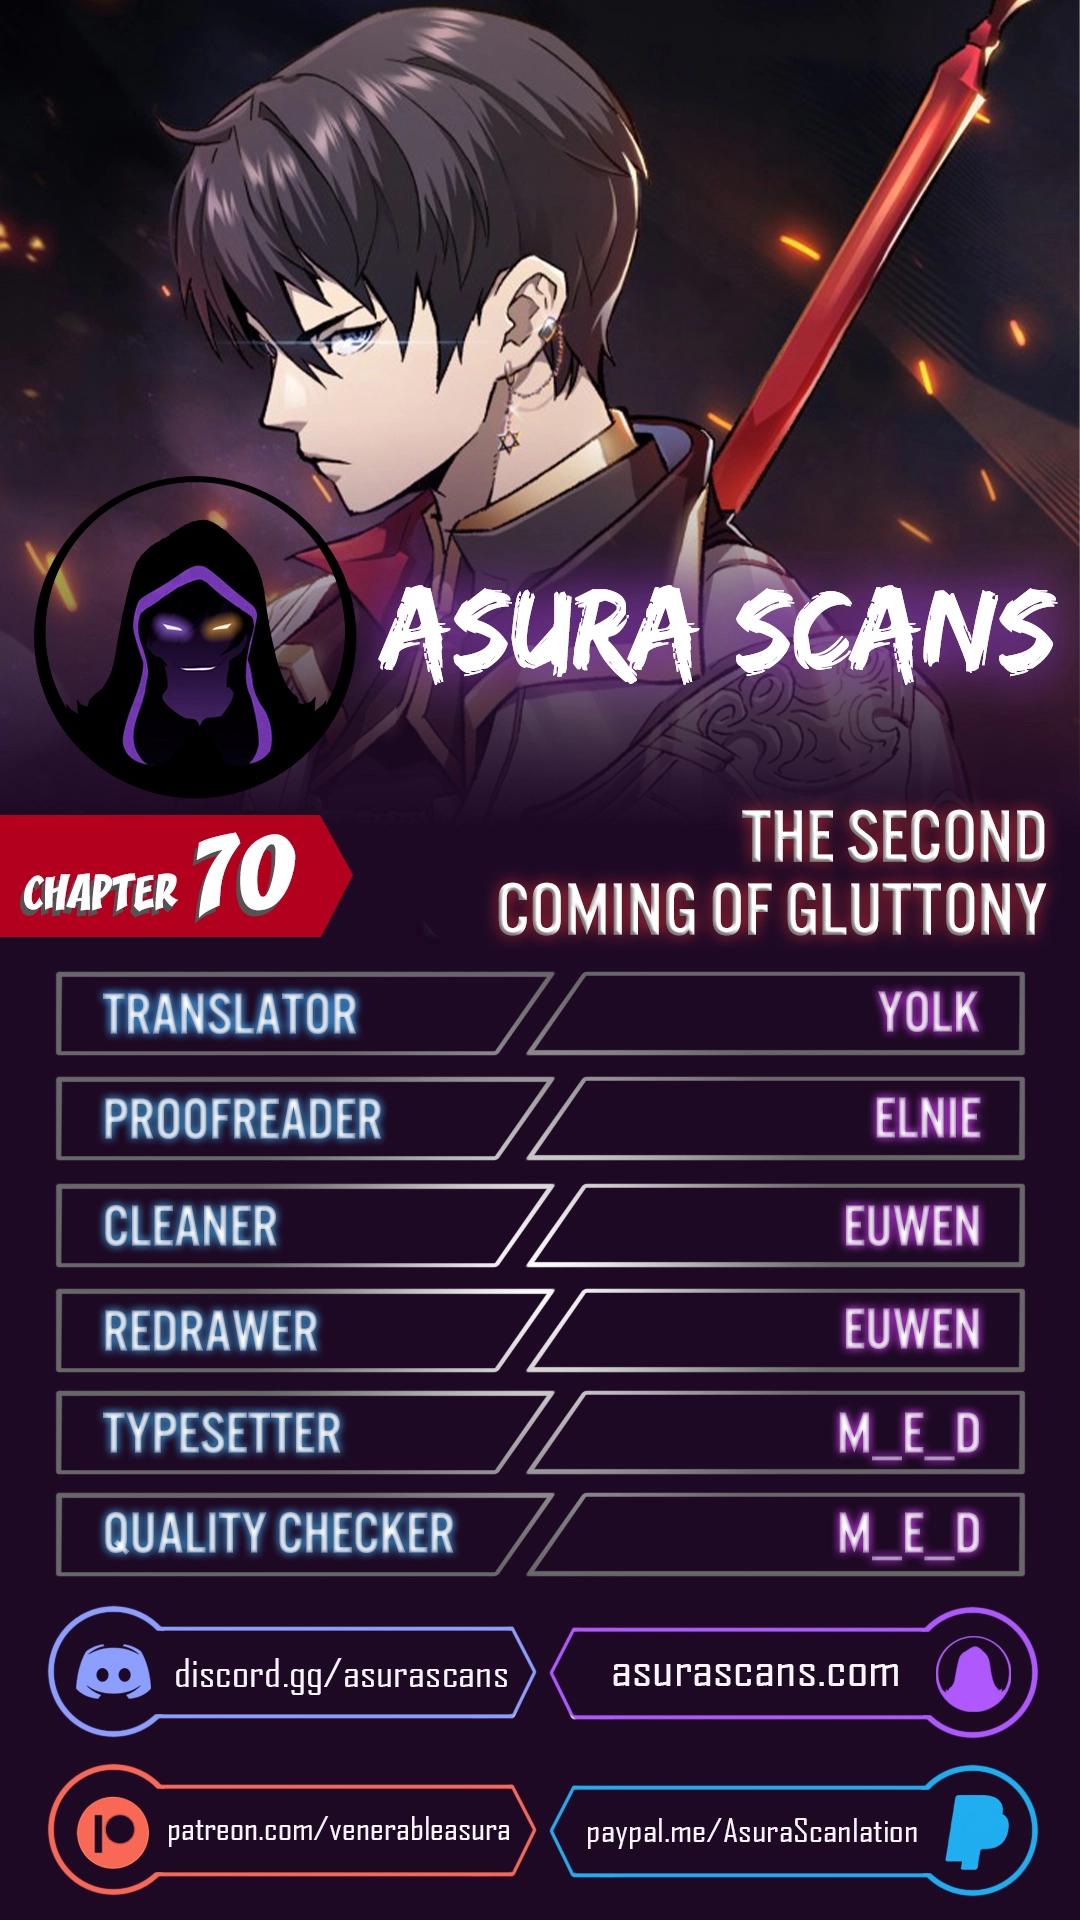 The Second Coming of Gluttony Chapter 70, The Second Coming of Gluttony 70, Read The Second Coming of Gluttony Chapter 70, The Second Coming of Gluttony Chapter 70 Manga, The Second Coming of Gluttony Chapter 70 english, The Second Coming of Gluttony Chapter 70 raw manga, The Second Coming of Gluttony Chapter 70 online, The Second Coming of Gluttony Chapter 70 high quality, The Second Coming of Gluttony 70 chapter, The Second Coming of Gluttony Chapter 70 manga scan